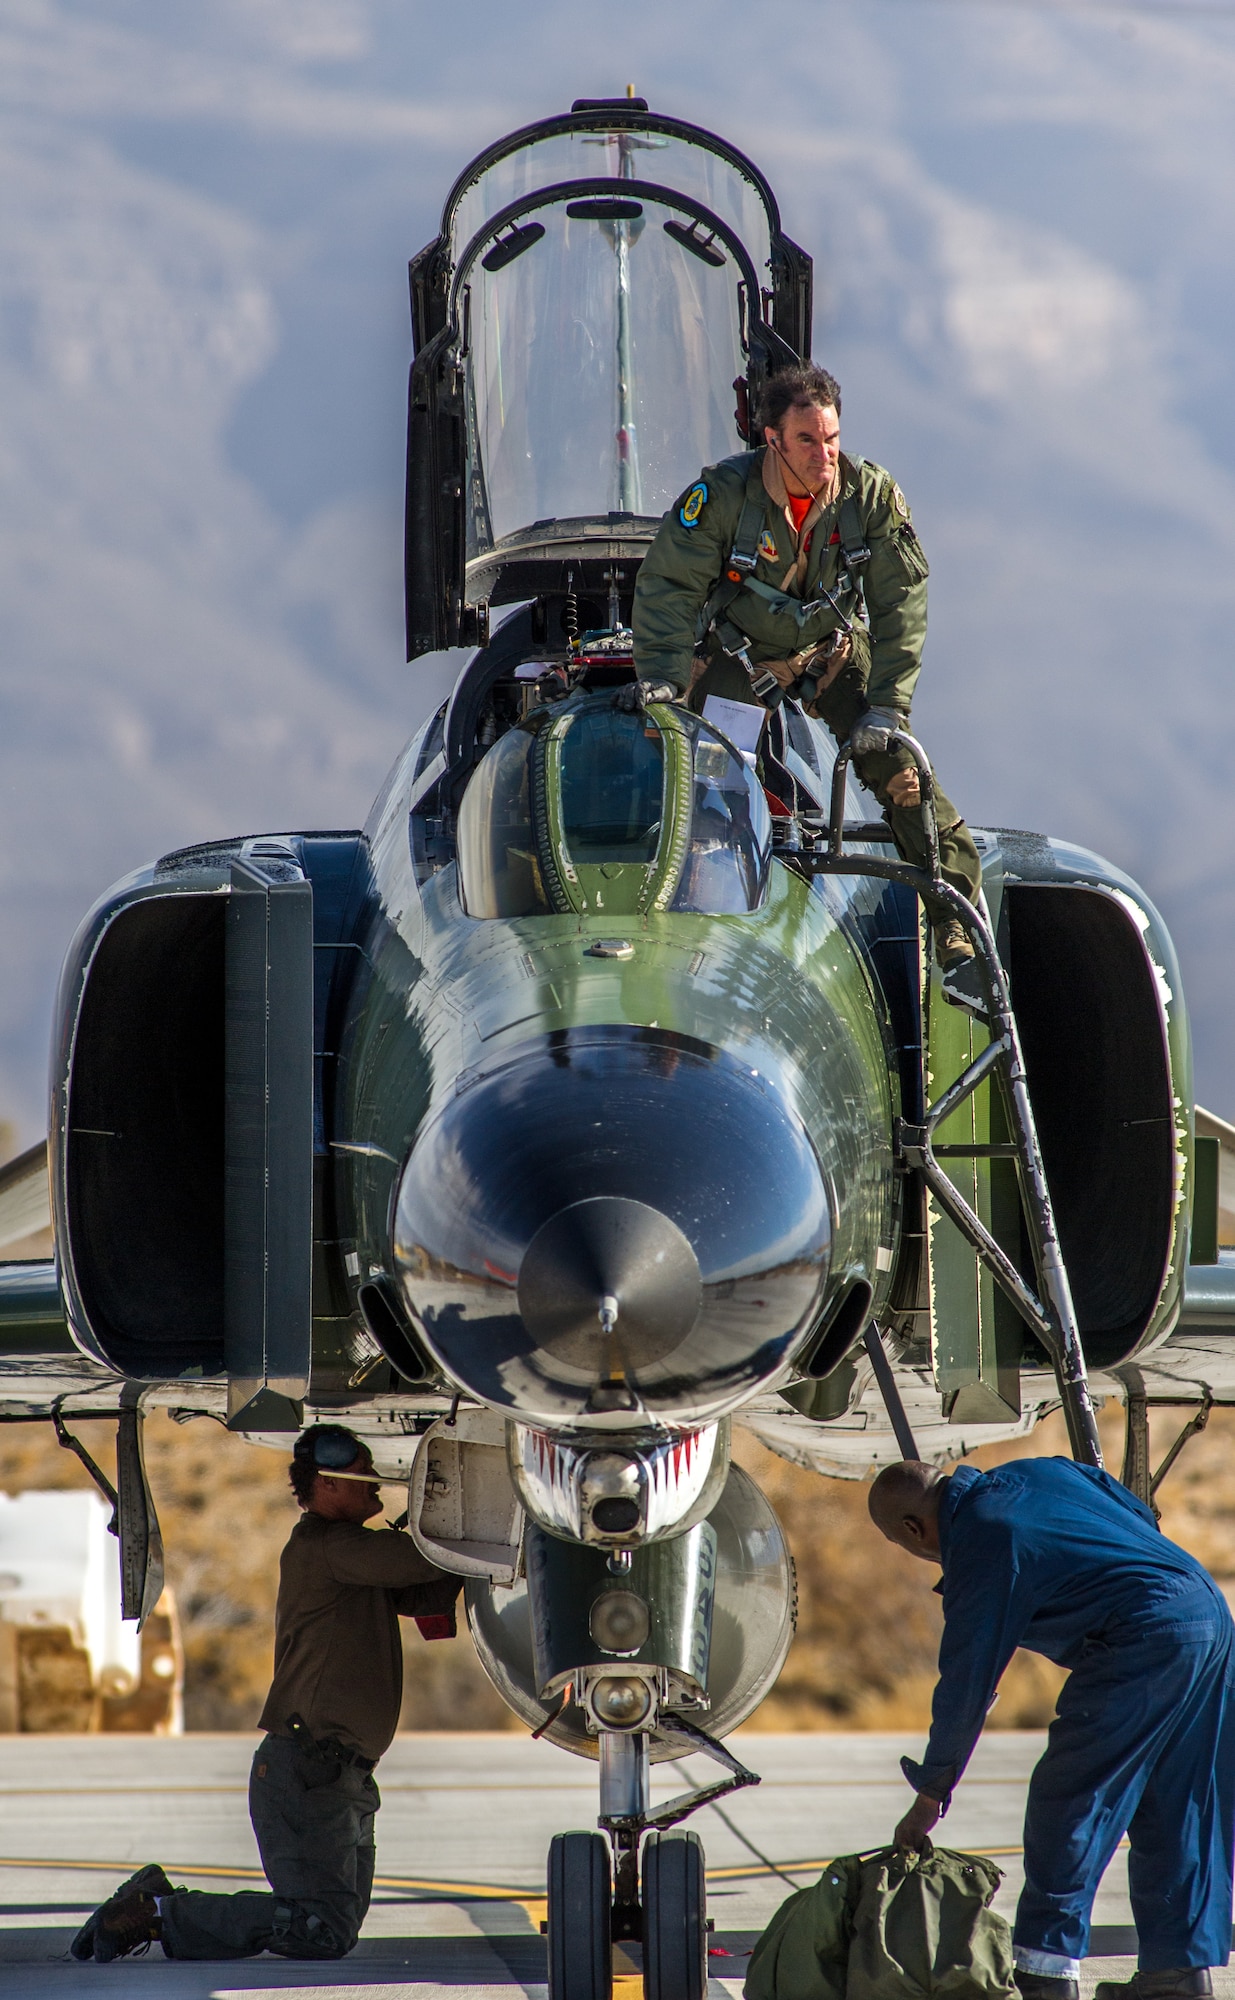 Civilian QF-4E Pilot/Controller Lt. Col. (Ret) Jim "WAM" Harkins, exits his McDonnell Douglas F-4 Phantom II, after a rehearsal for the final military flight and retirement ceremony for the storied aircraft at Holloman AFB, N.M., Dec. 16, 2016. The final variant of the Phantom II was the QF-4 unmanned aerial targets flown by the 82nd Aerial Target Squadron Detachment 1 at Holloman AFB. The ceremonial flight was Harkins last in a cockpit for DoD; he will now be a ground controller for the QF-4's replacement, the QF-16. The F-4 Phantom II entered the U.S. Air Force inventory in 1963 and was the primary multi-role aircraft in the USAF throughout the 1960s and 1970s. The F-4 flew bombing, combat air patrol, fighter escort, reconnaissance and the famous Wild Weasel anti-aircraft missile suppression missions.  (U.S. Air Force photo by J.M. Eddins Jr.)